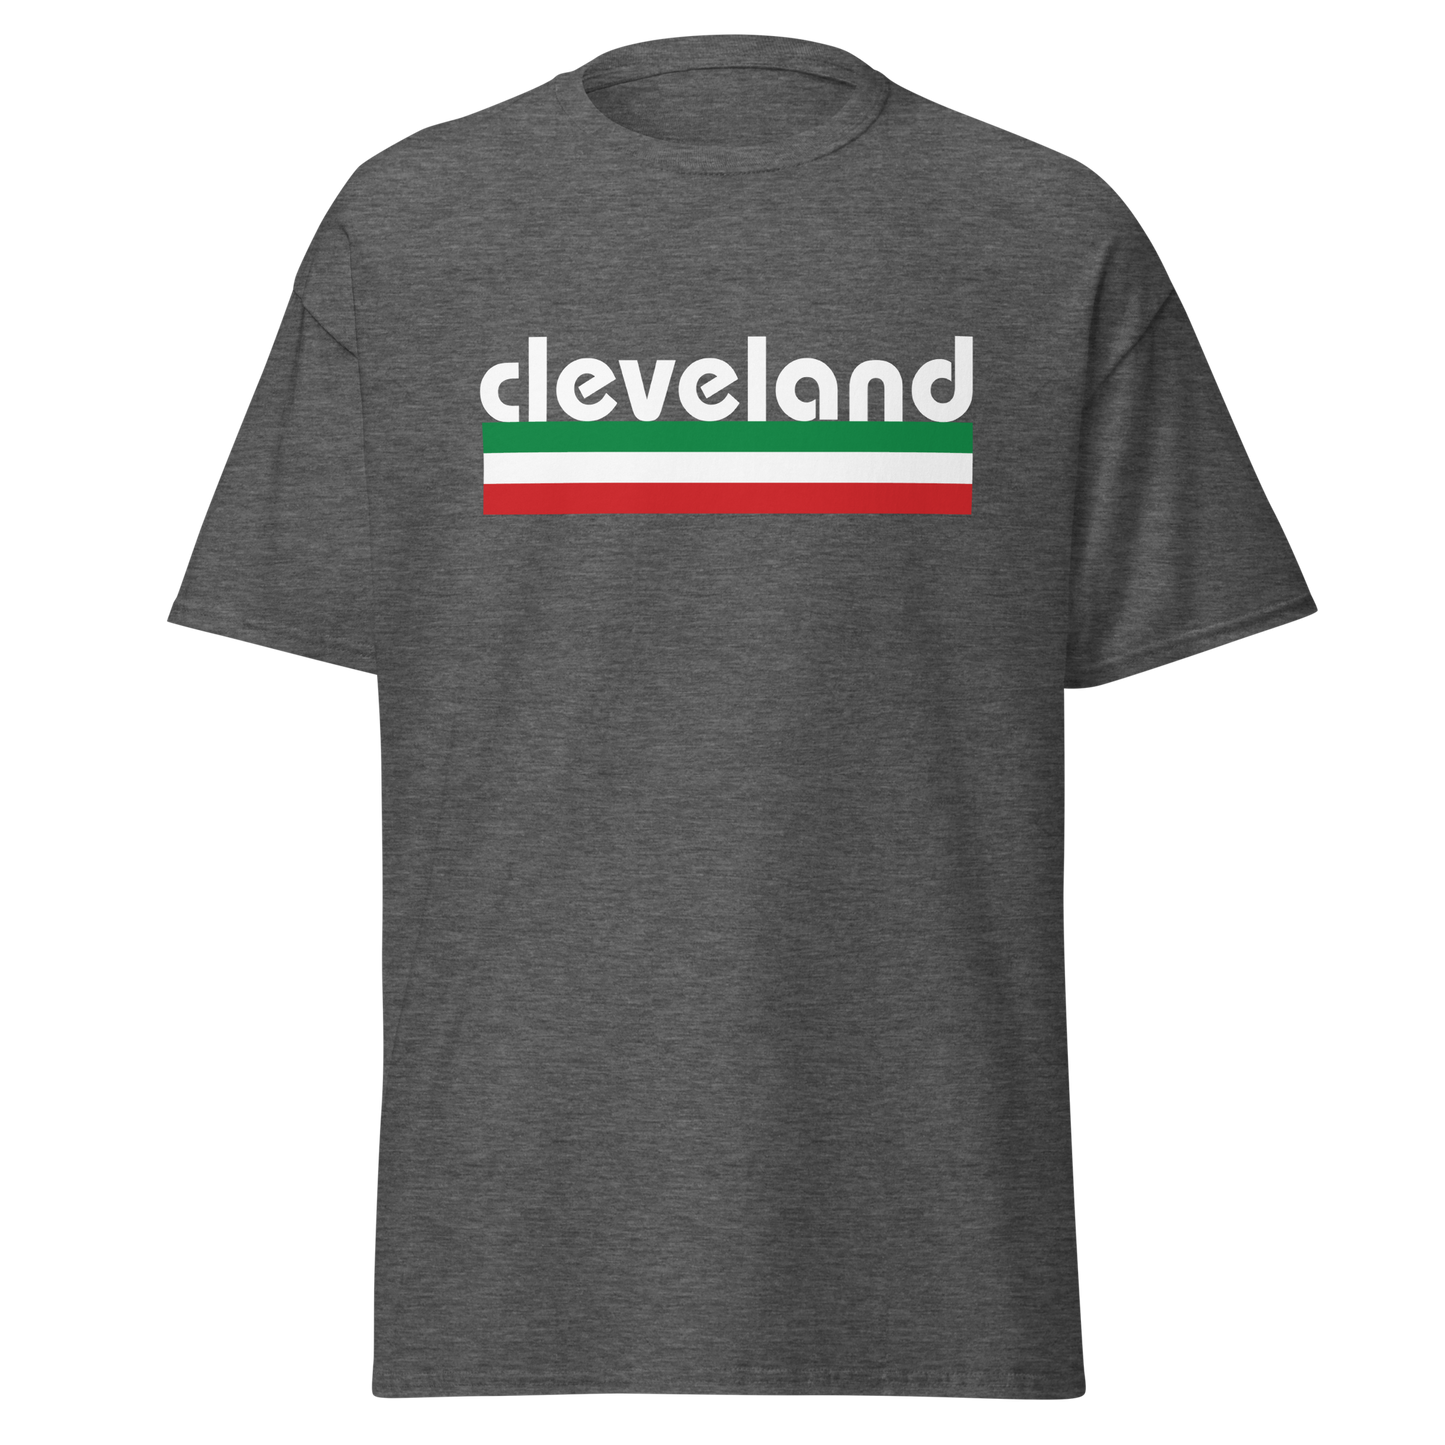 Cleveland Italian Pride T-Shirt - Vintage Flag Tee for Cleveland Italians